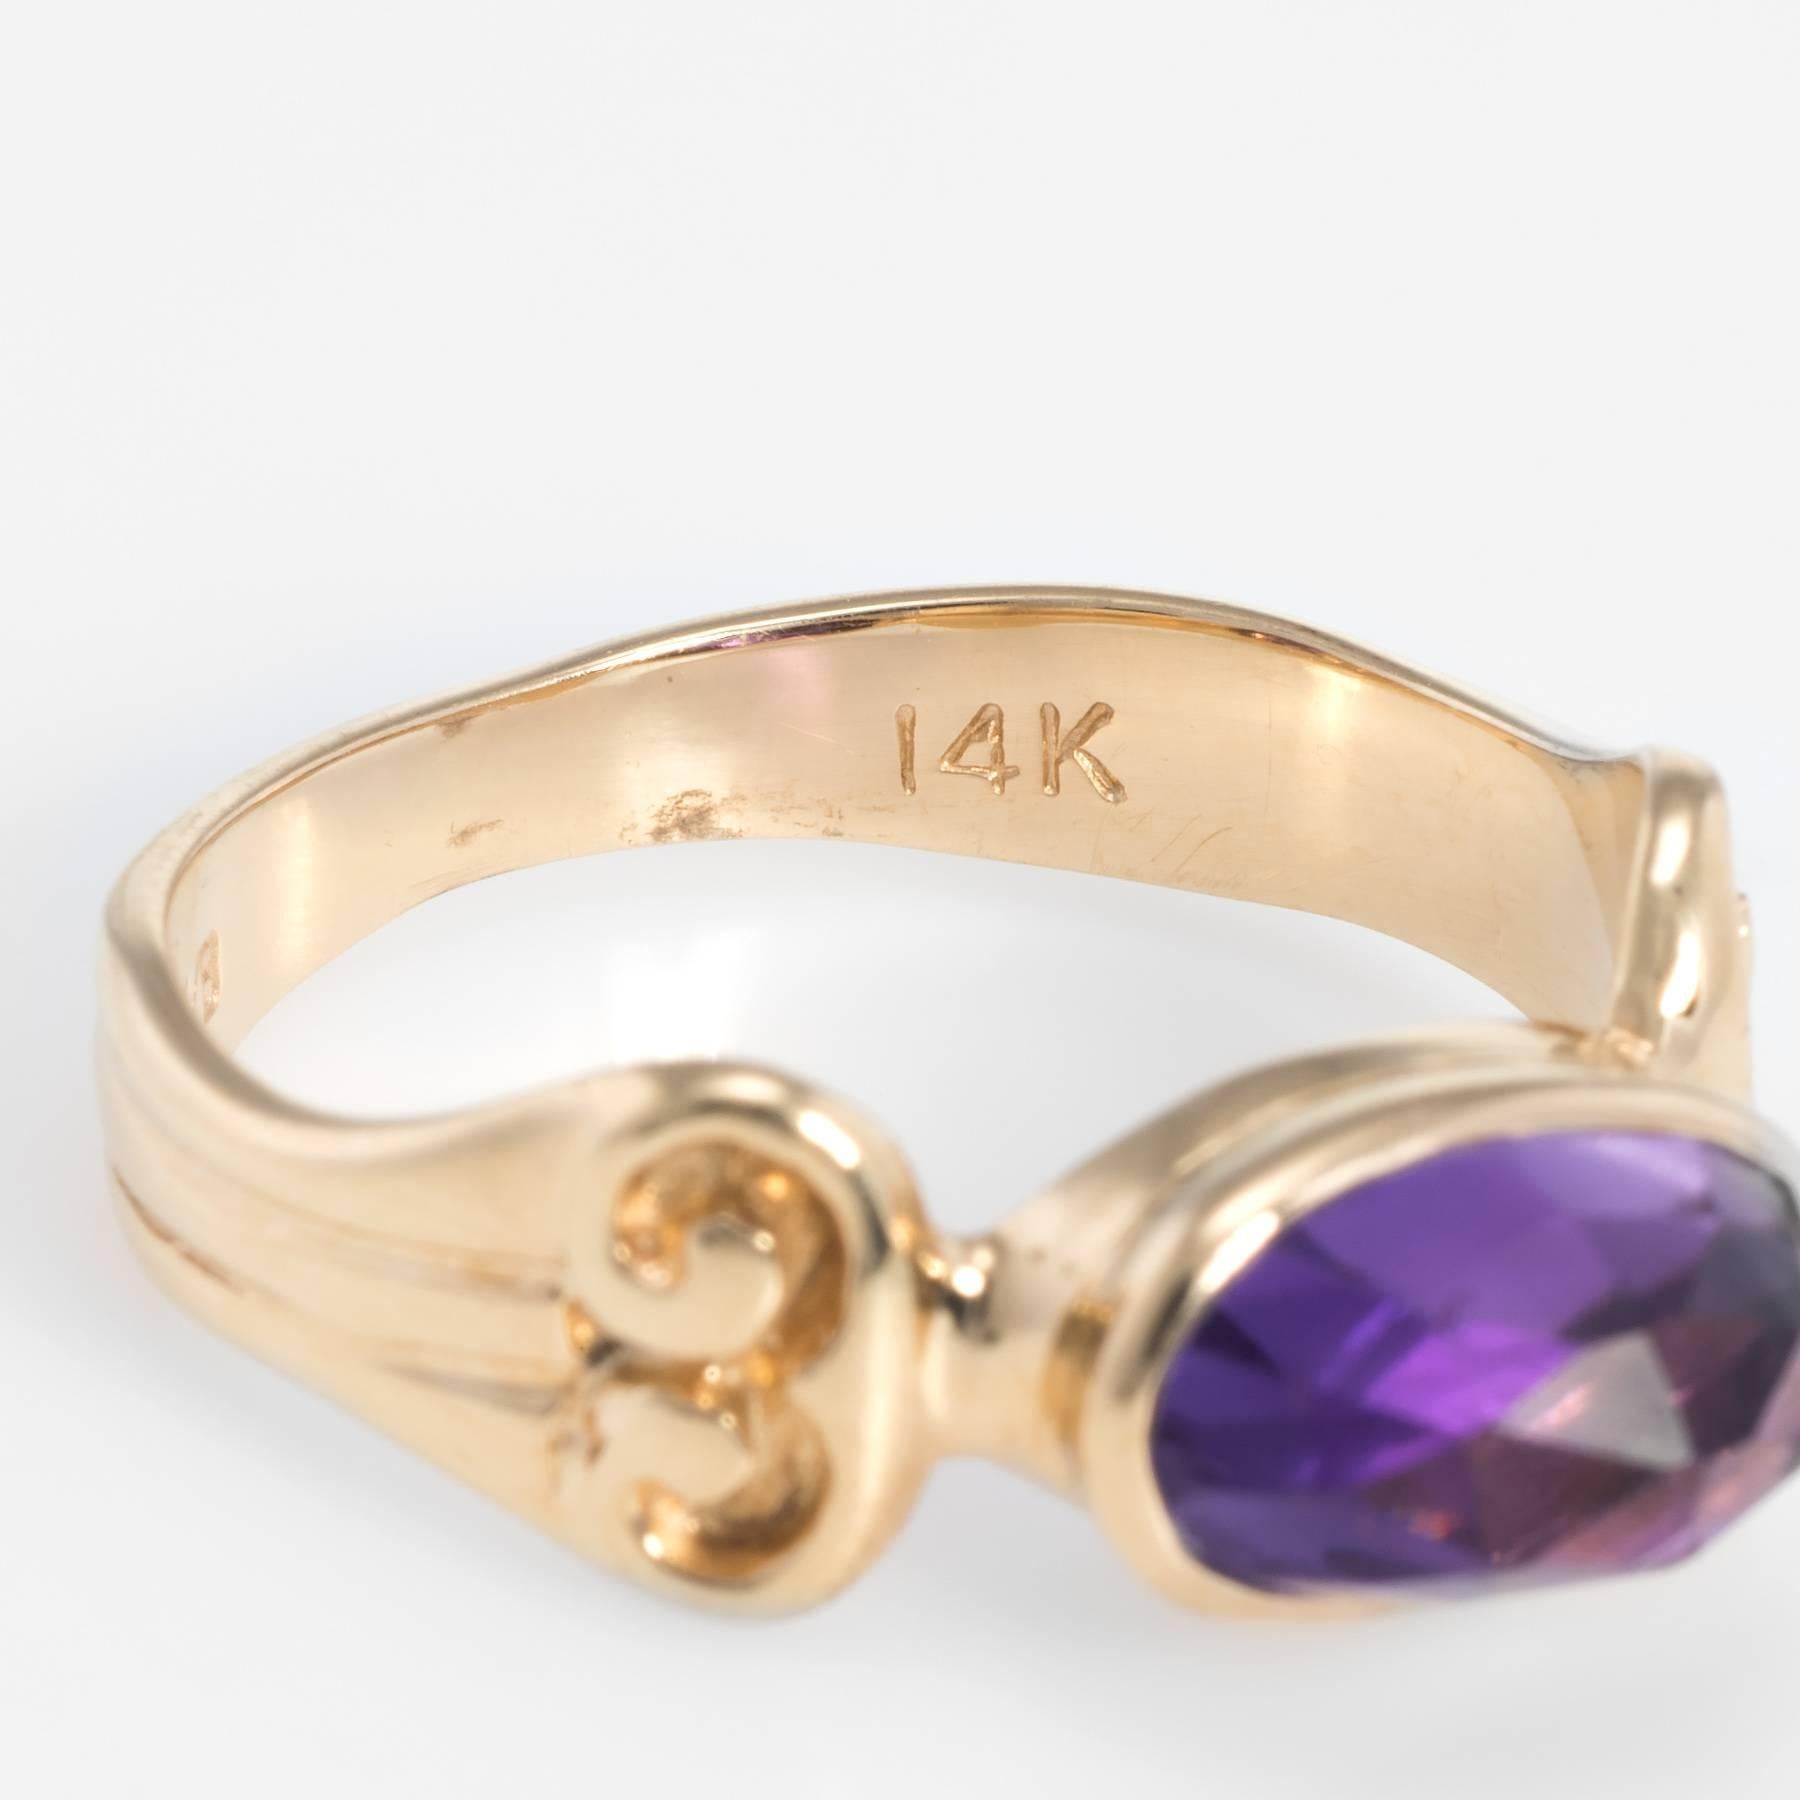 Elegant vintage stacking ring, crafted in 14 karat yellow gold. 

Checkerboard faceted amethyst measures 9.75mm x 5.5mm and is estimated at 1.25 carats. The amethyst is in excellent condition and free of cracks or chips.   

The ring is in excellent